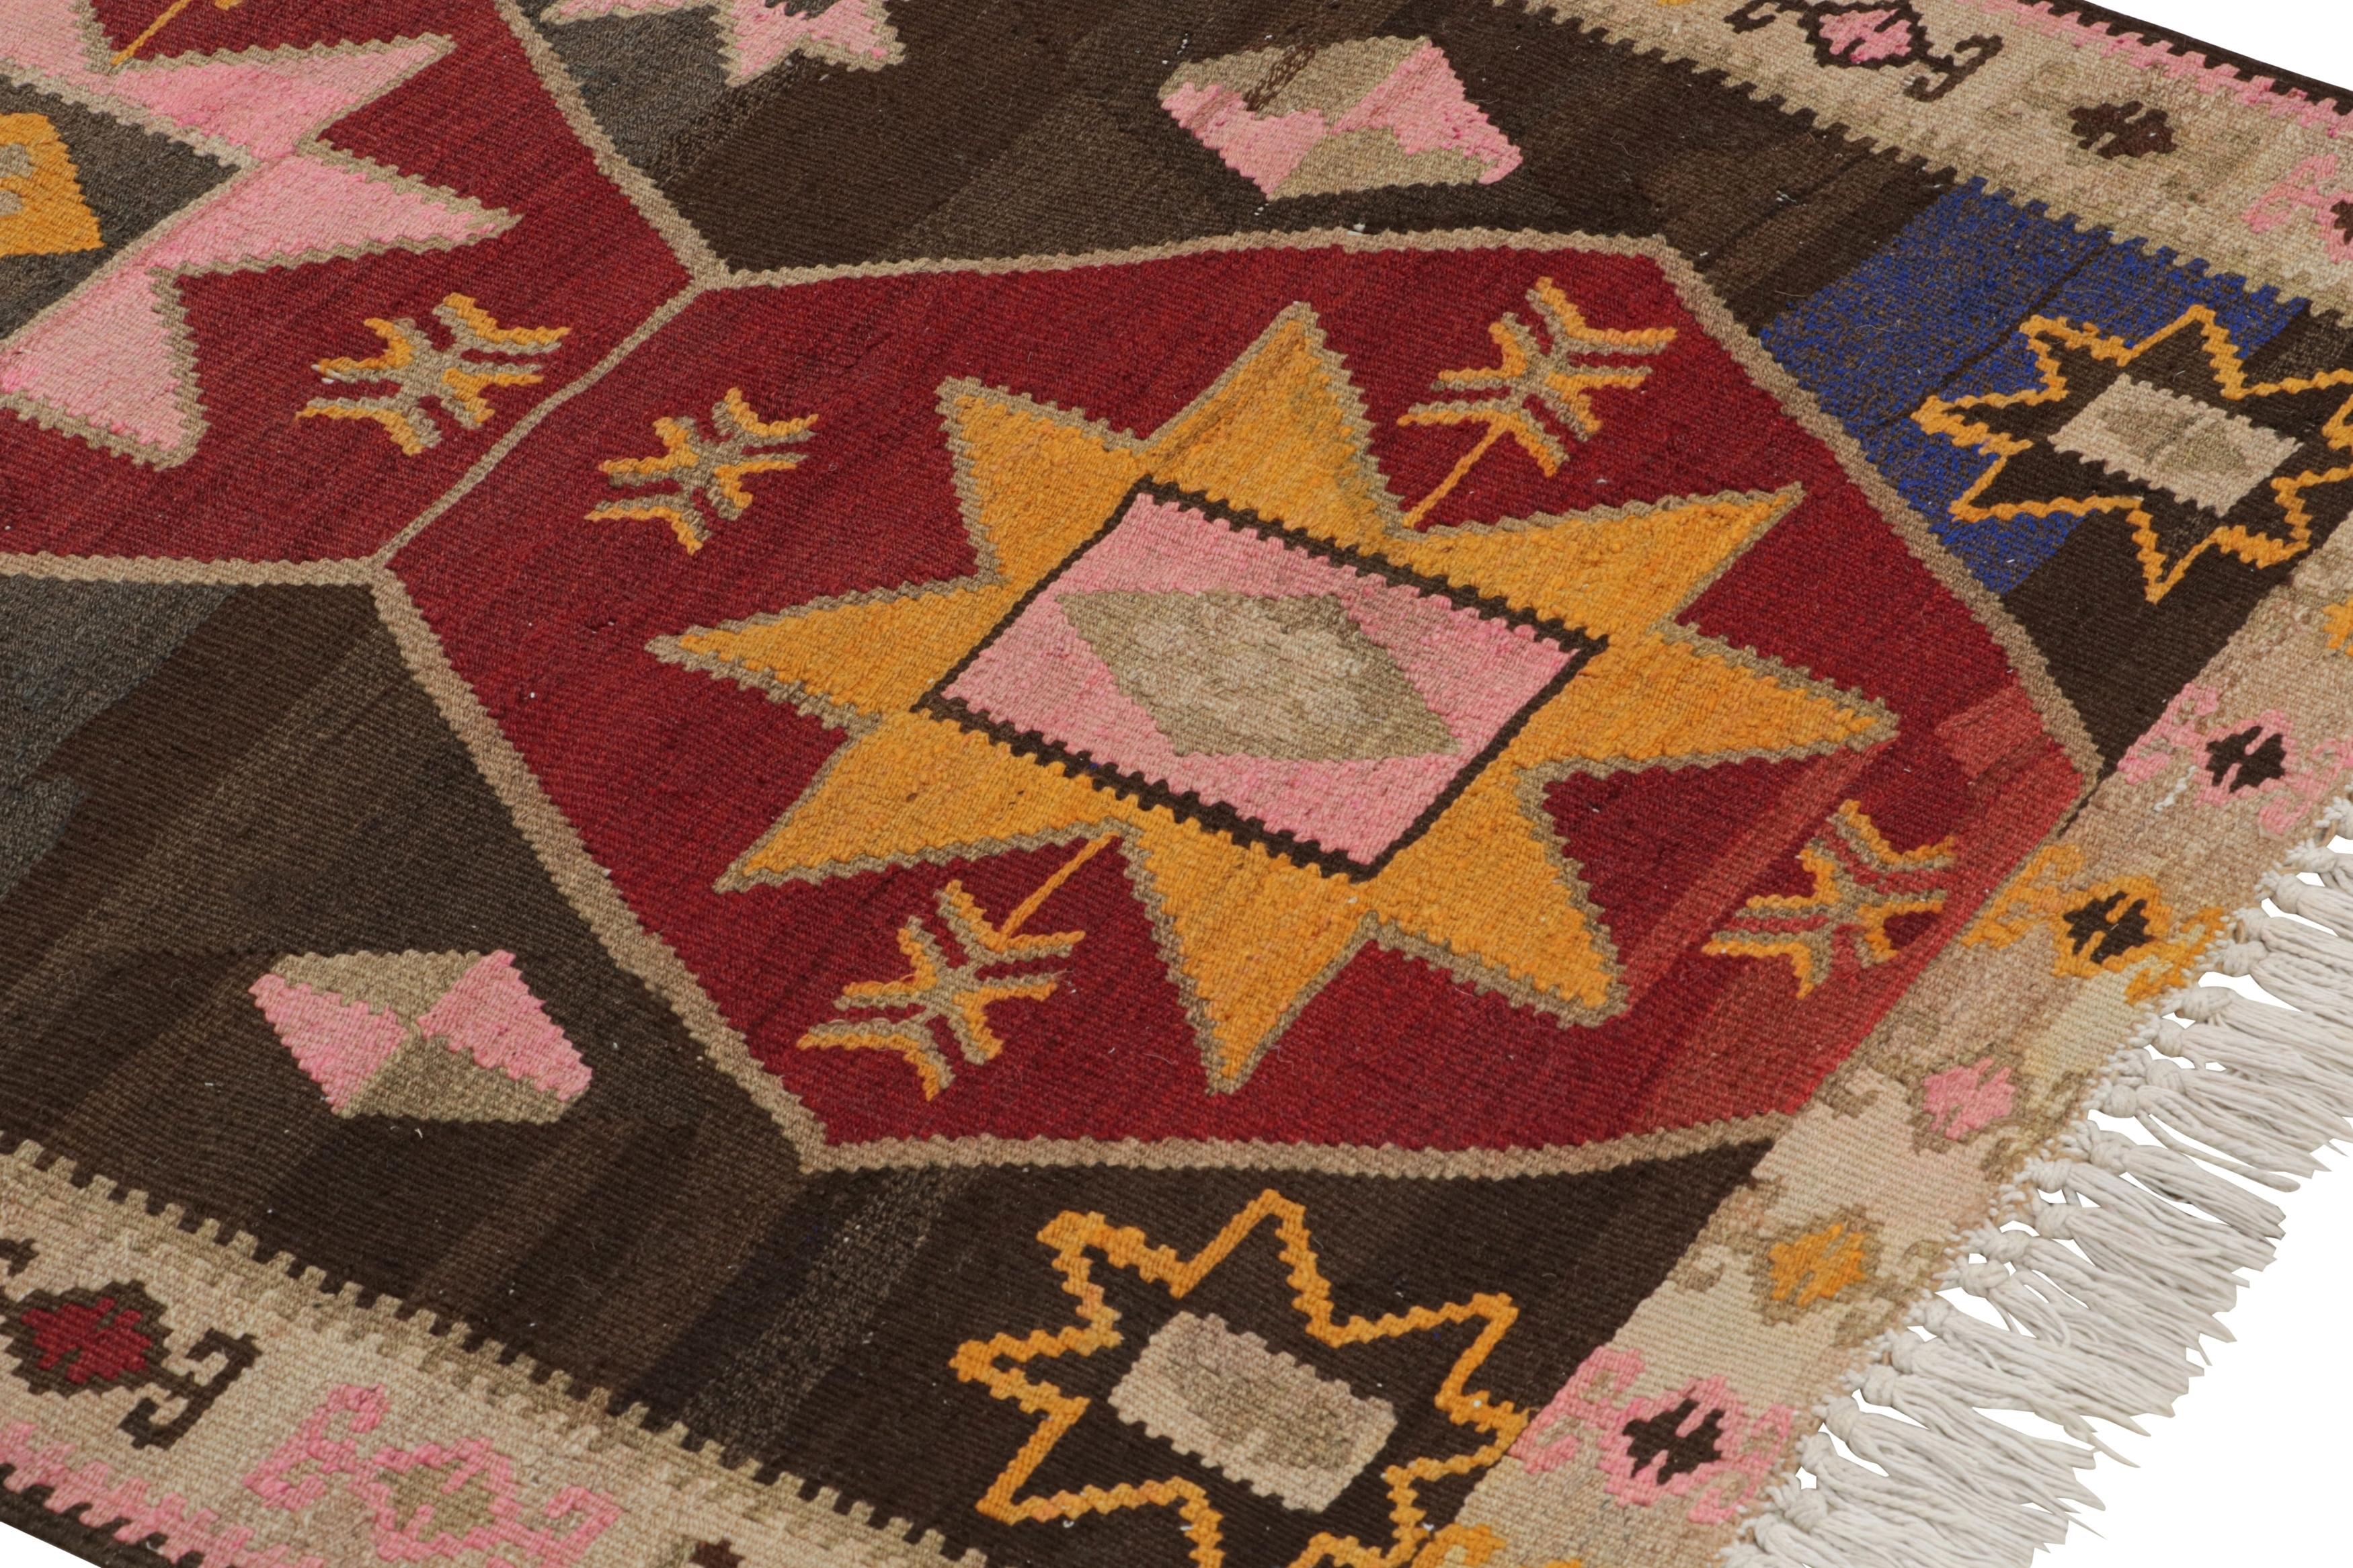 Handwoven in a wool flat-weave originating from Turkey circa 1910-1920, this antique Kilim rug enjoys an early 20th century Kurdish Kilim design, a wide runner in size with both traditional and rare colorways in this take on the time-honored